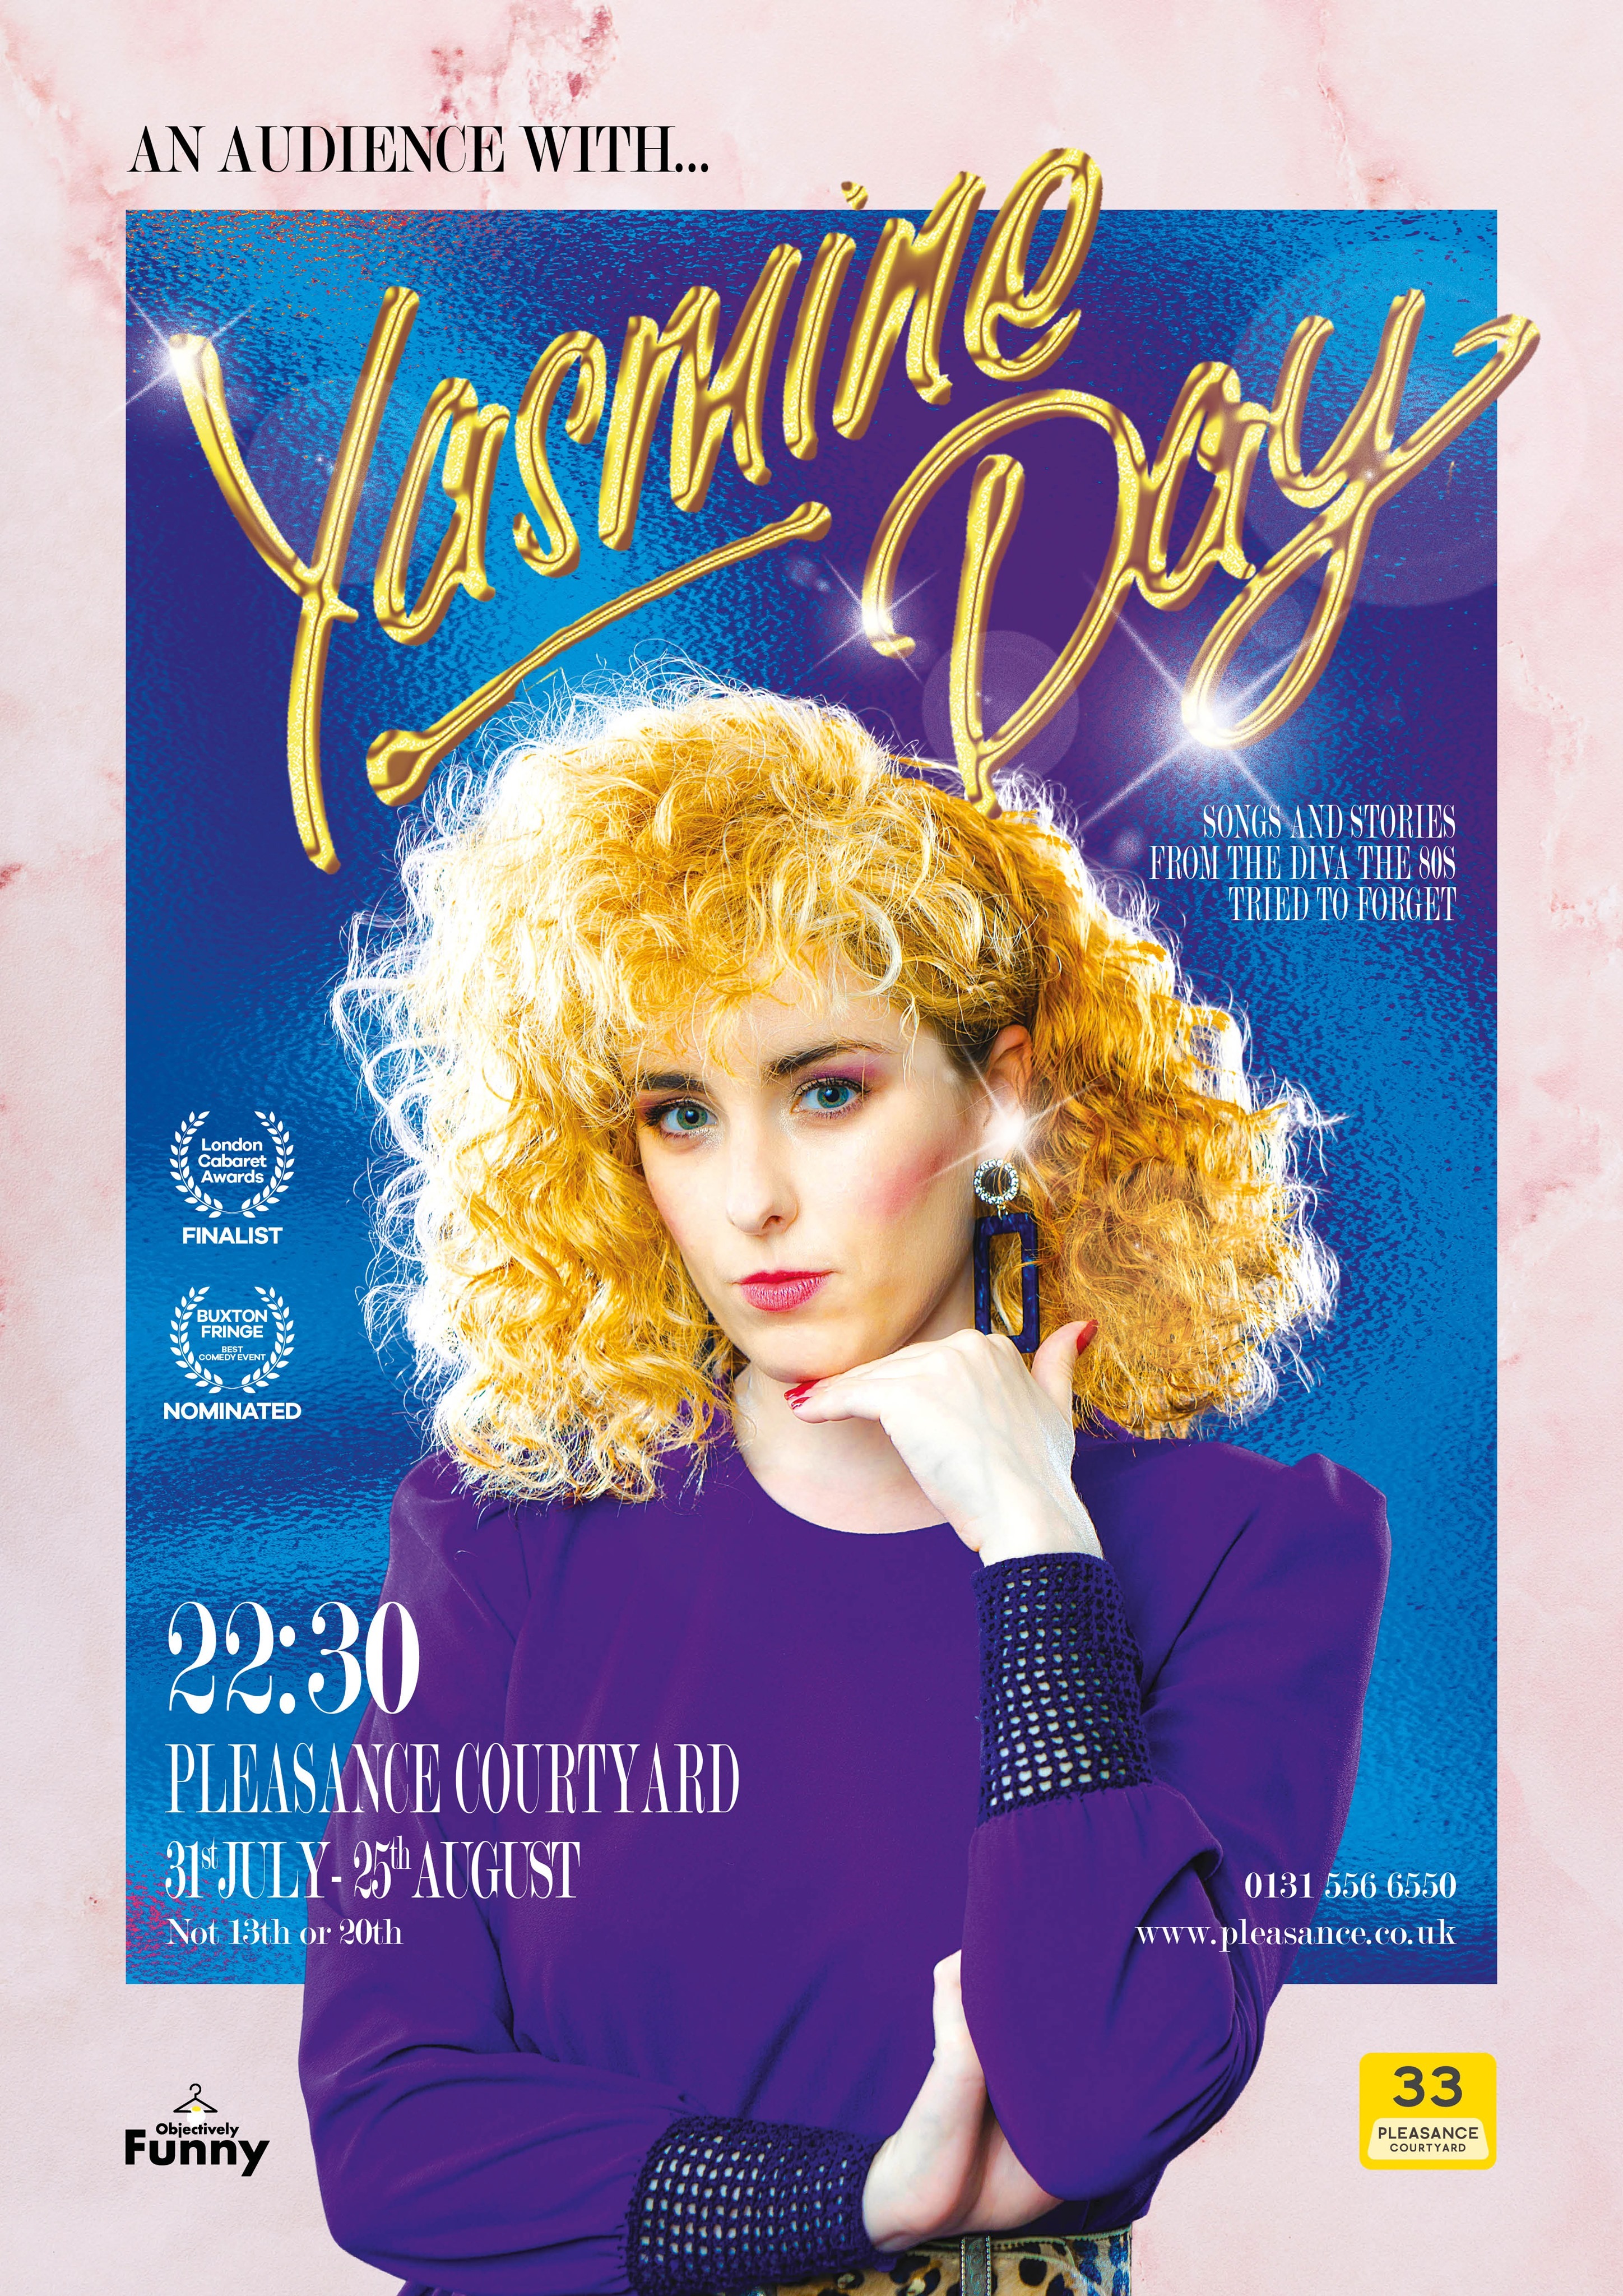 The poster for An Audience with Yasmine Day